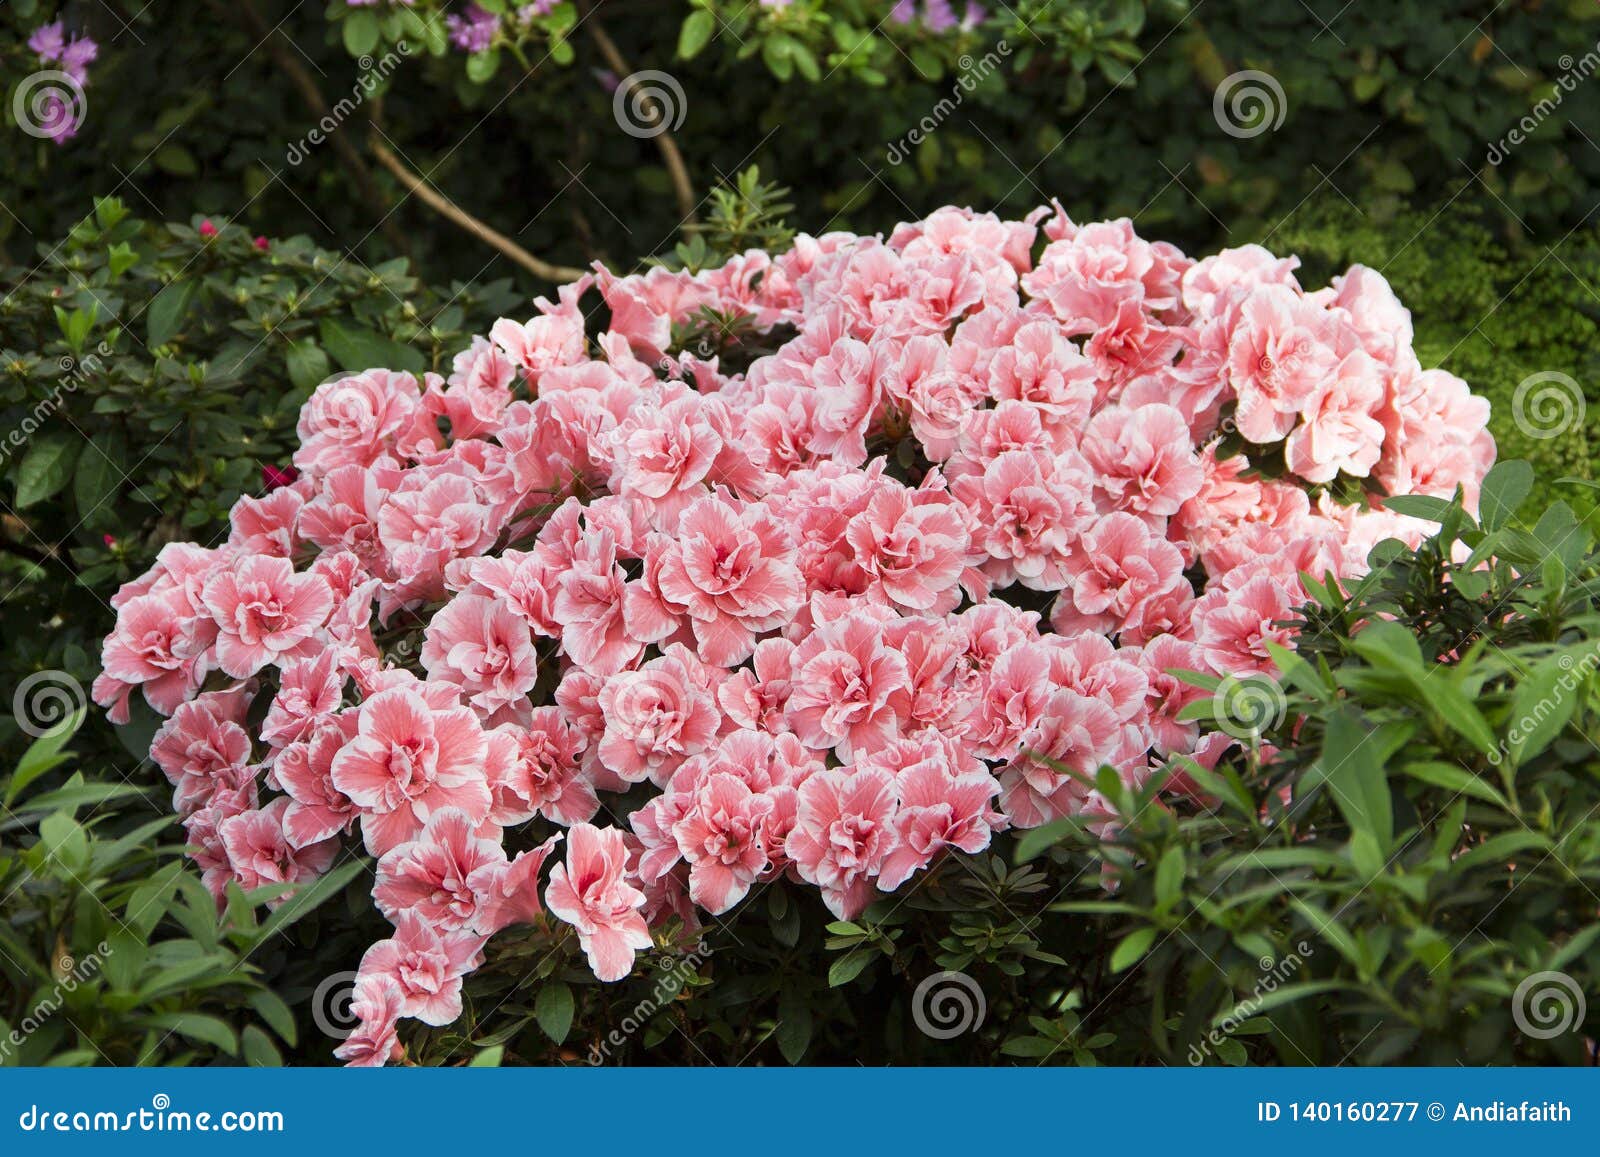 Beautiful Azalea Bush In A Botanical Garden Stock Image Image Of Flora Outside 140160277,How To Cook Carrots For Baby Led Weaning